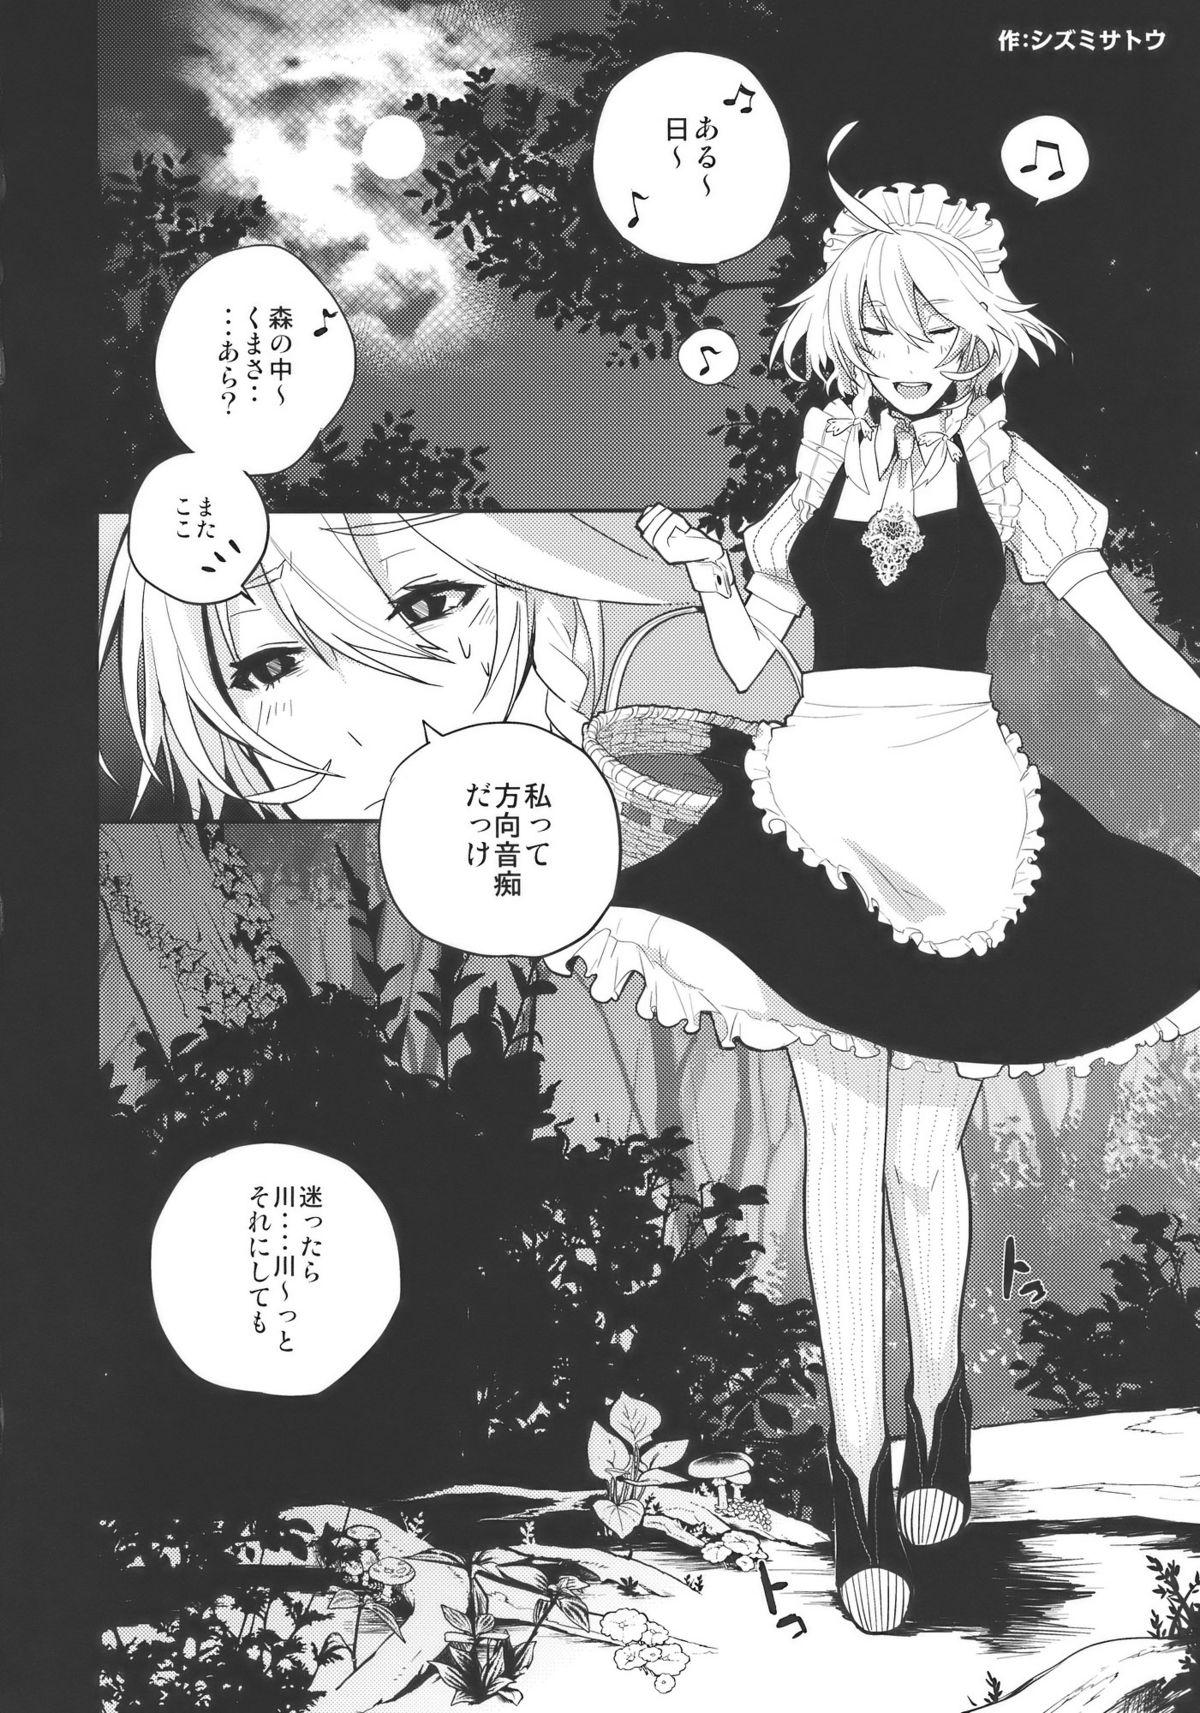 Peitos fairy story - Touhou project Tight - Page 4